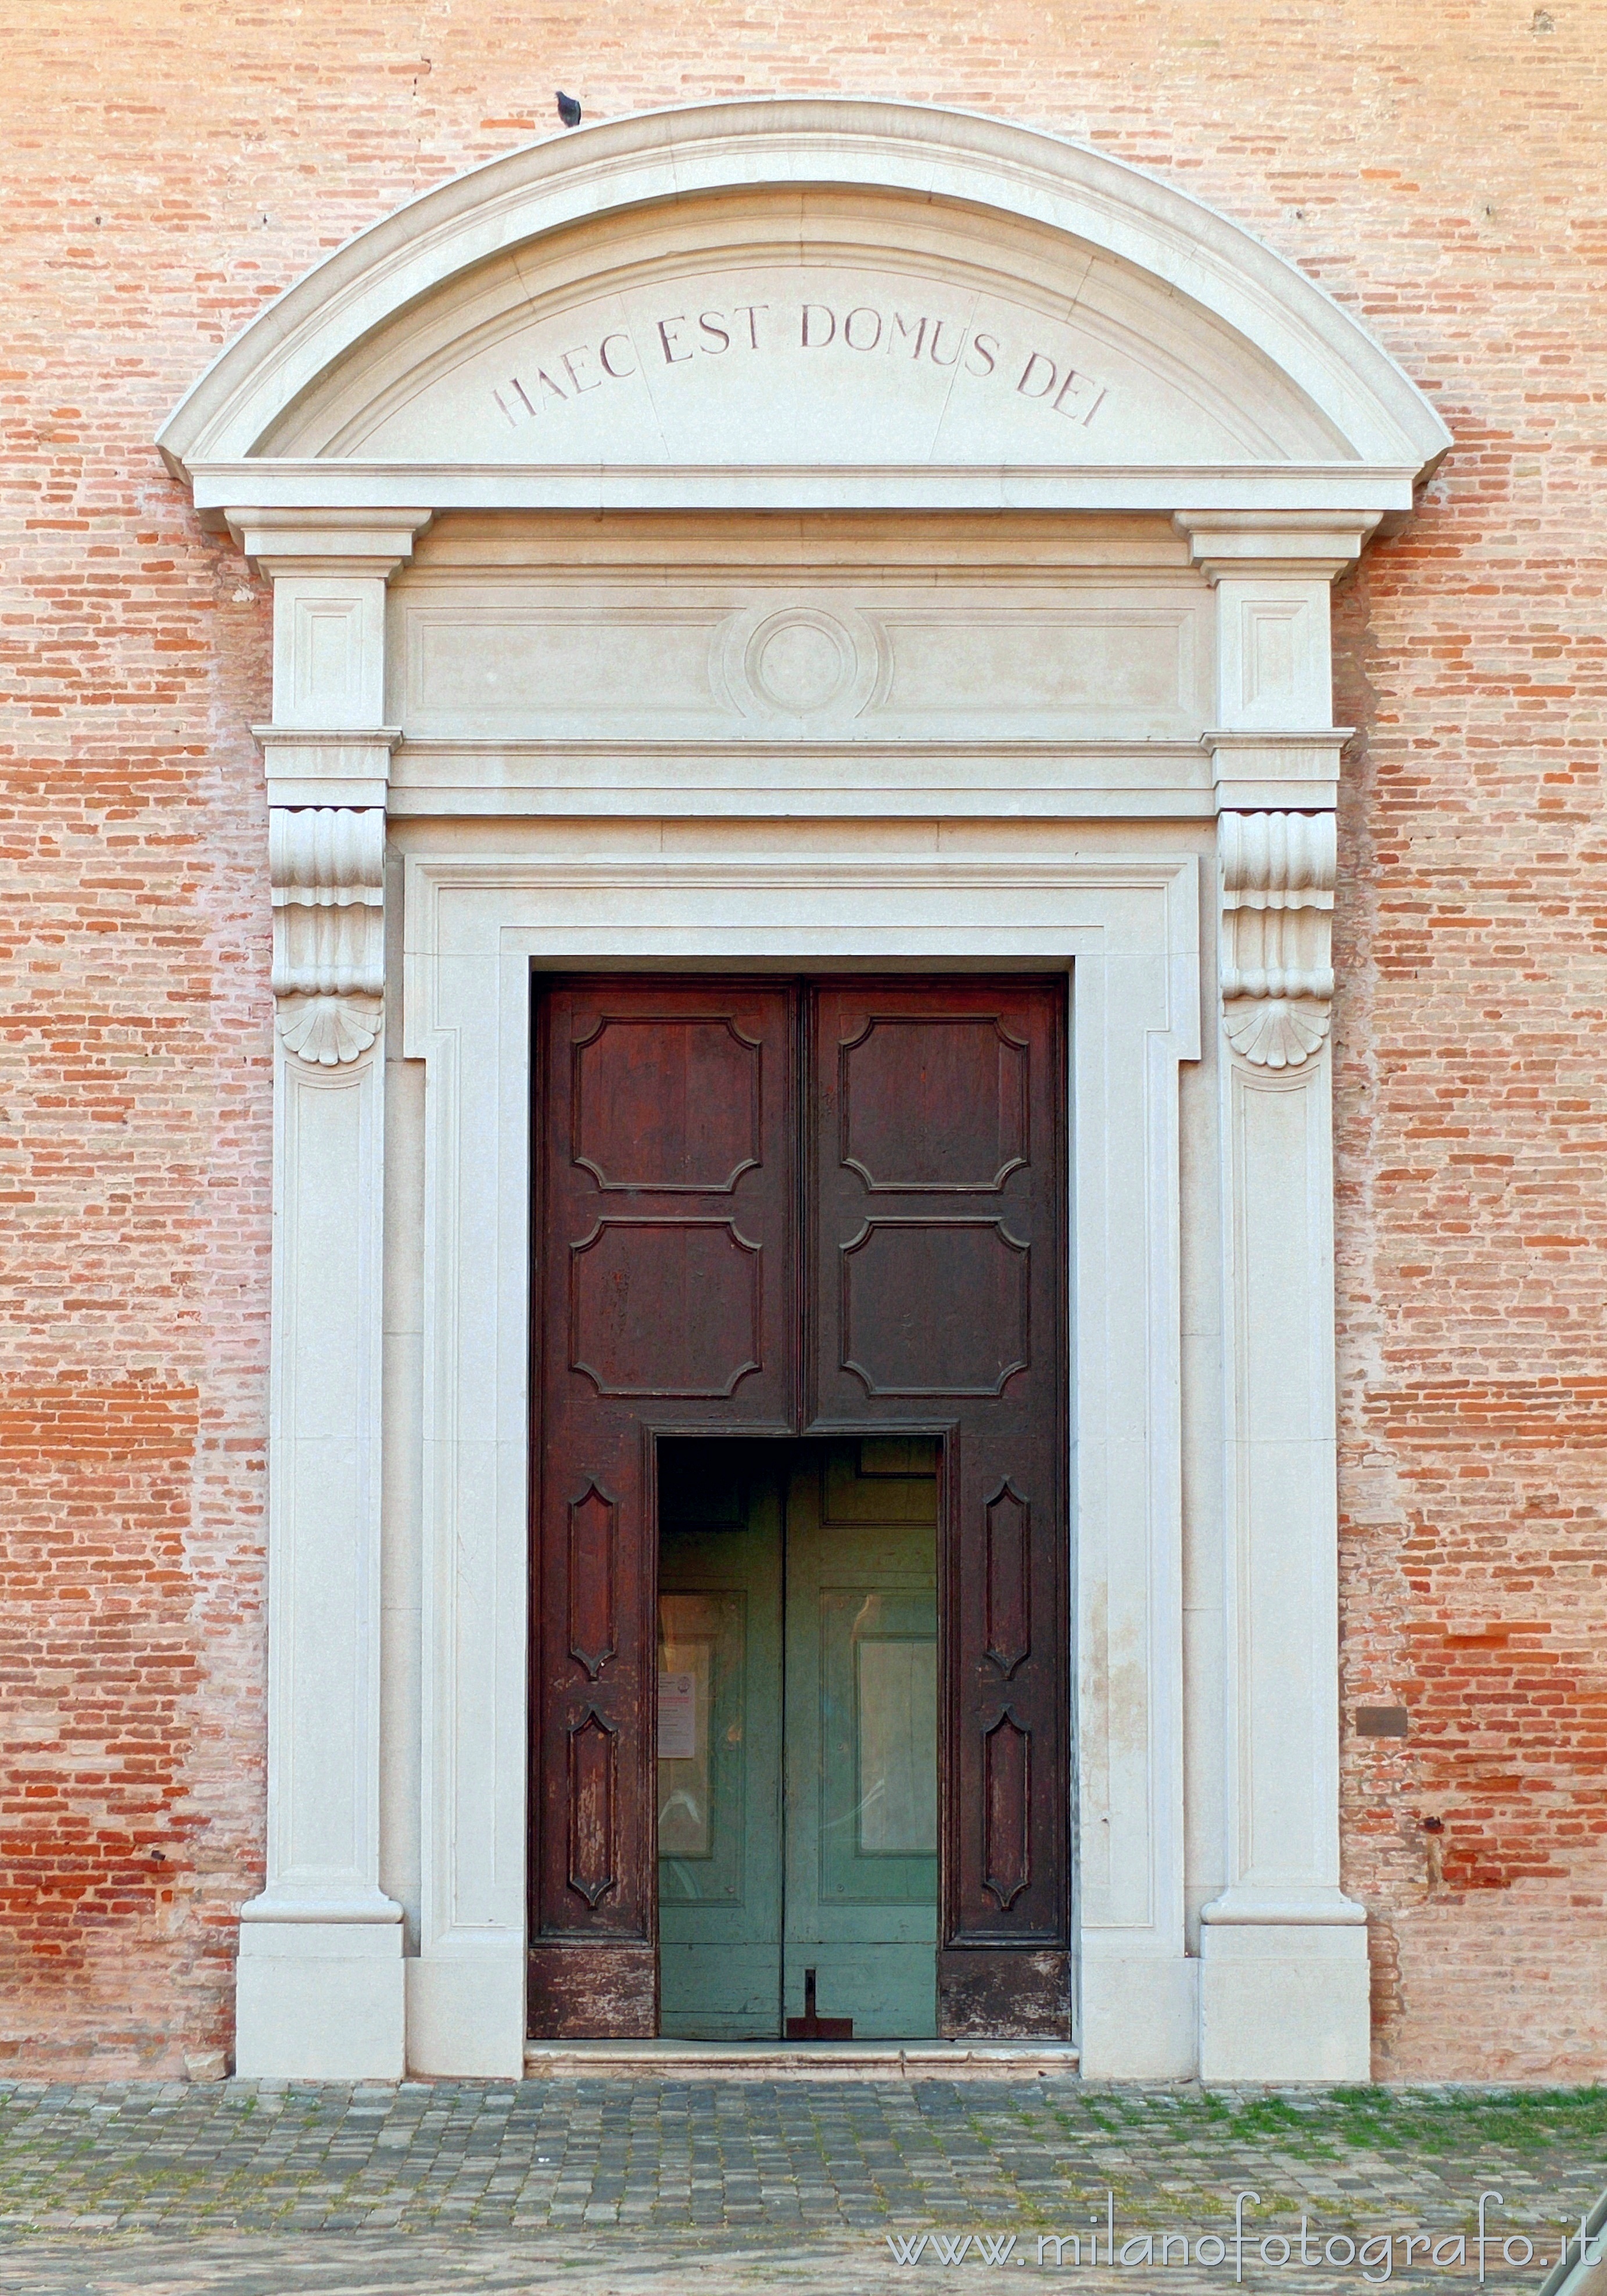 Santarcangelo di Romagna (Rimini, Italy): Entrance door of the Church of the Blessed Virgin of the Rosary - Santarcangelo di Romagna (Rimini, Italy)